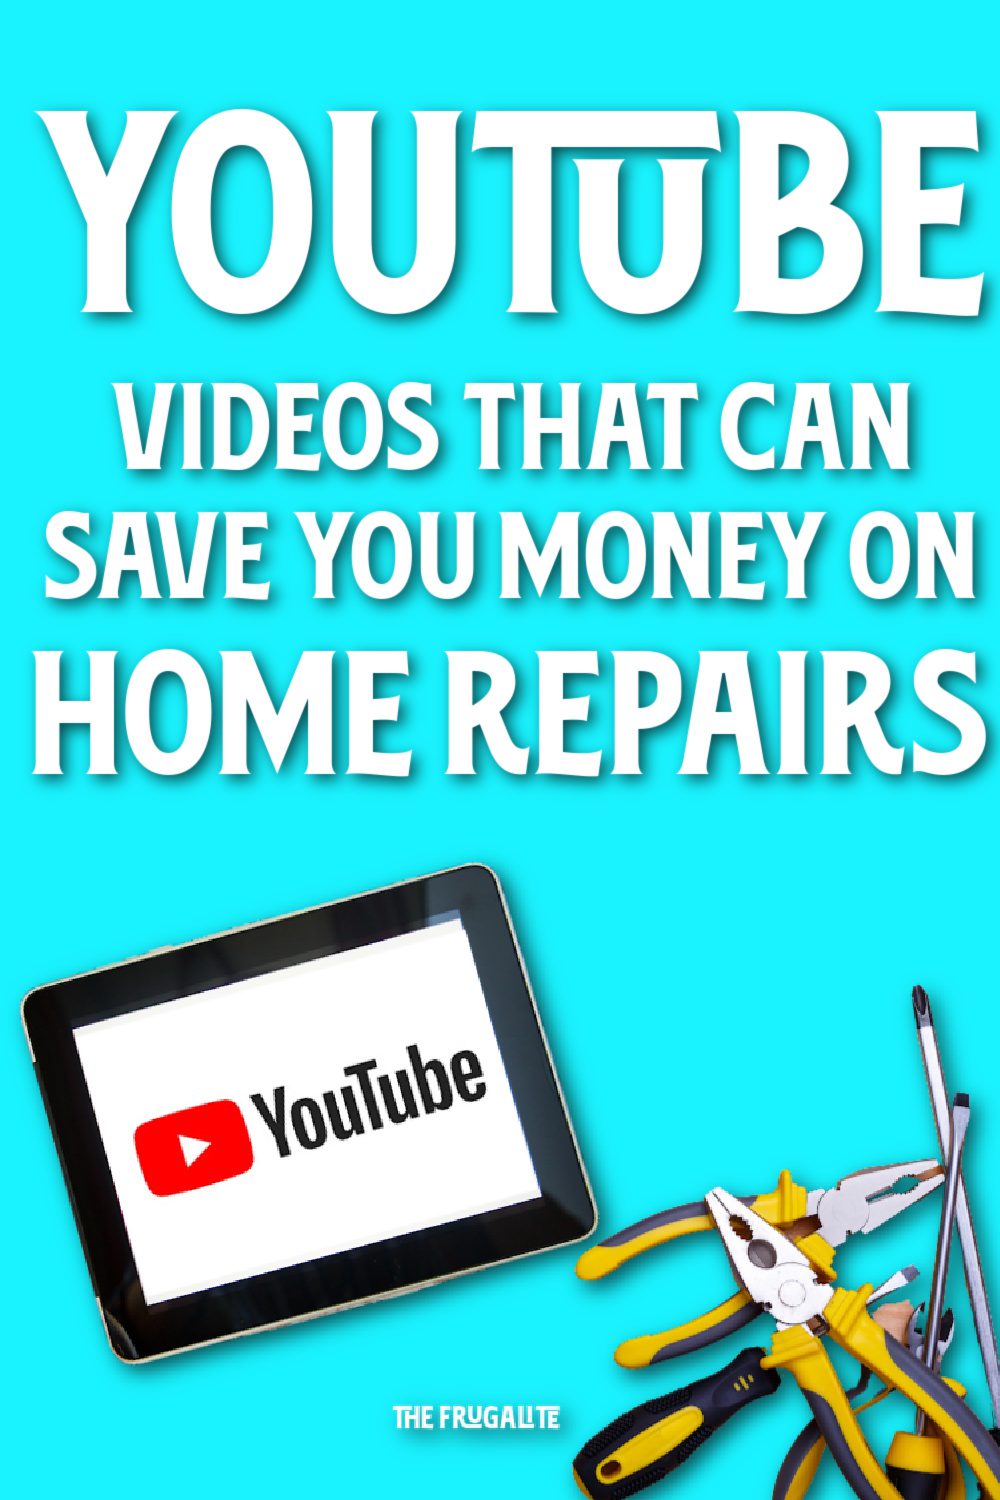 Youtube Videos That Can Save You Money on Home Repair